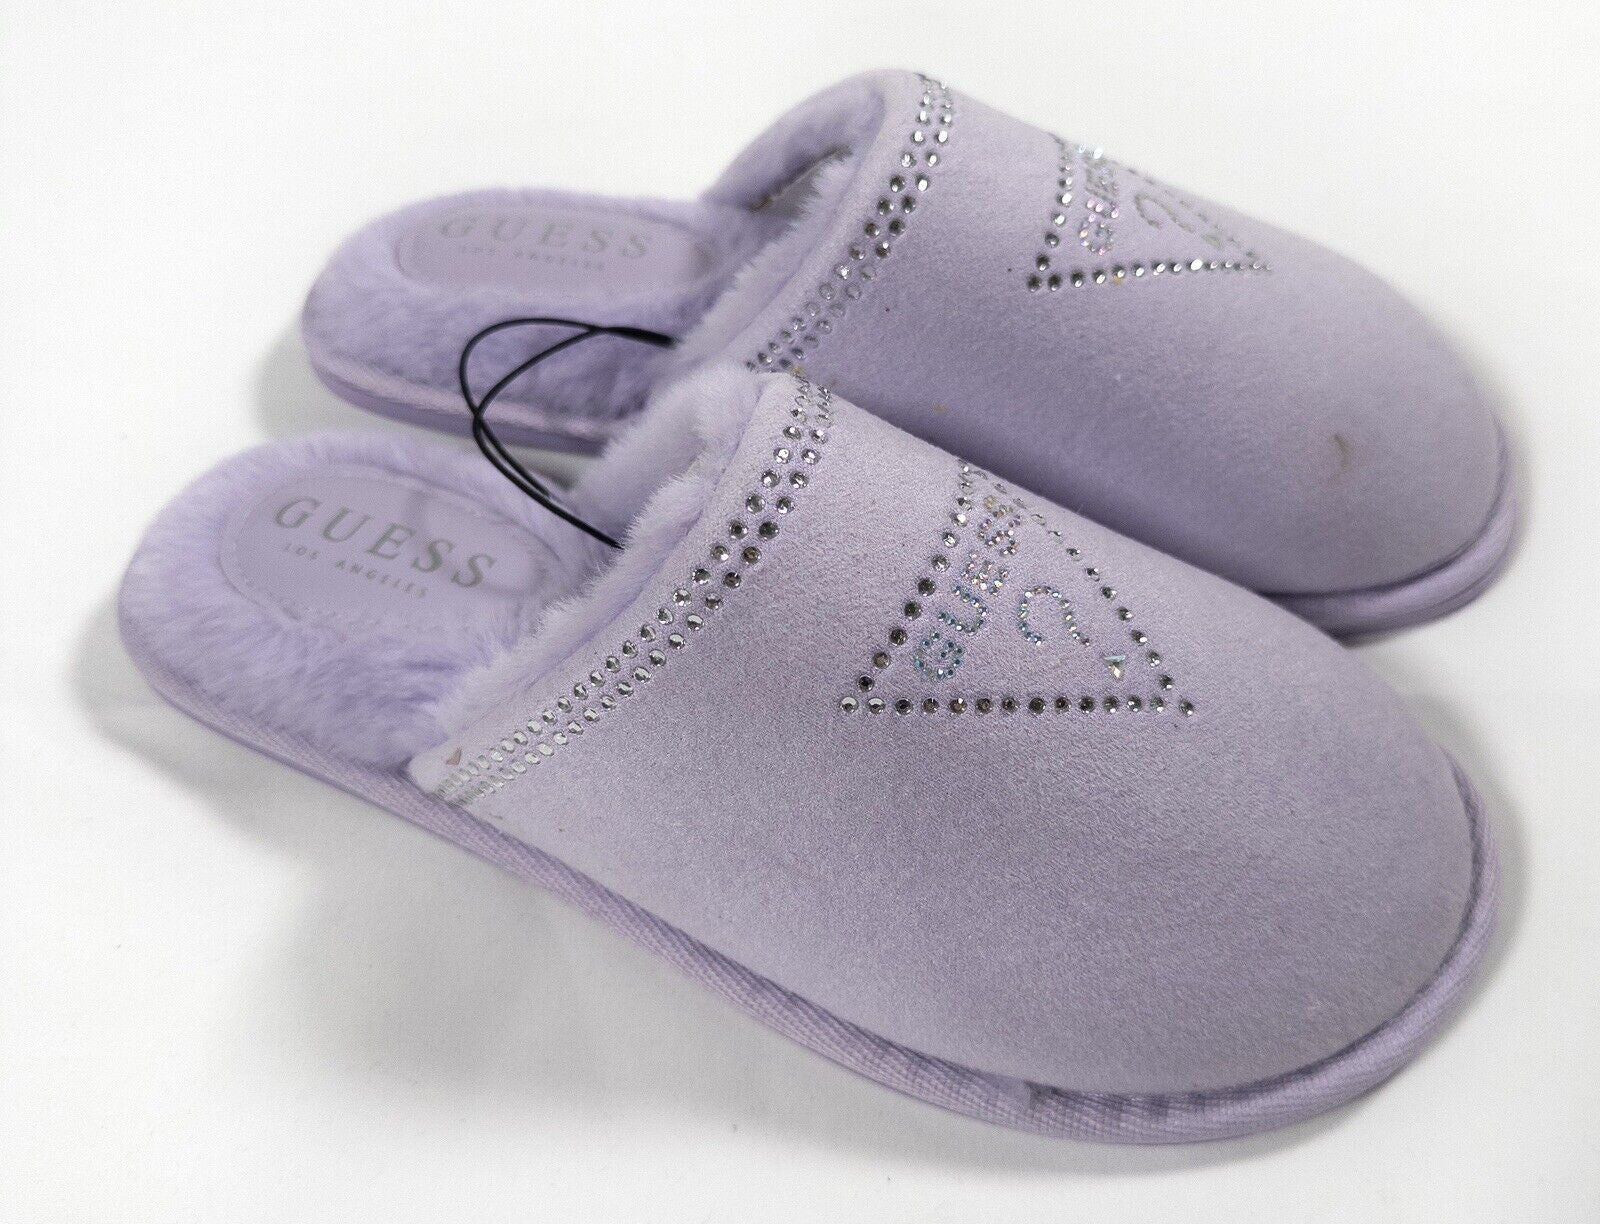 GUESS Women's Lilac Fluffy Slip On Slippers Size UK 5